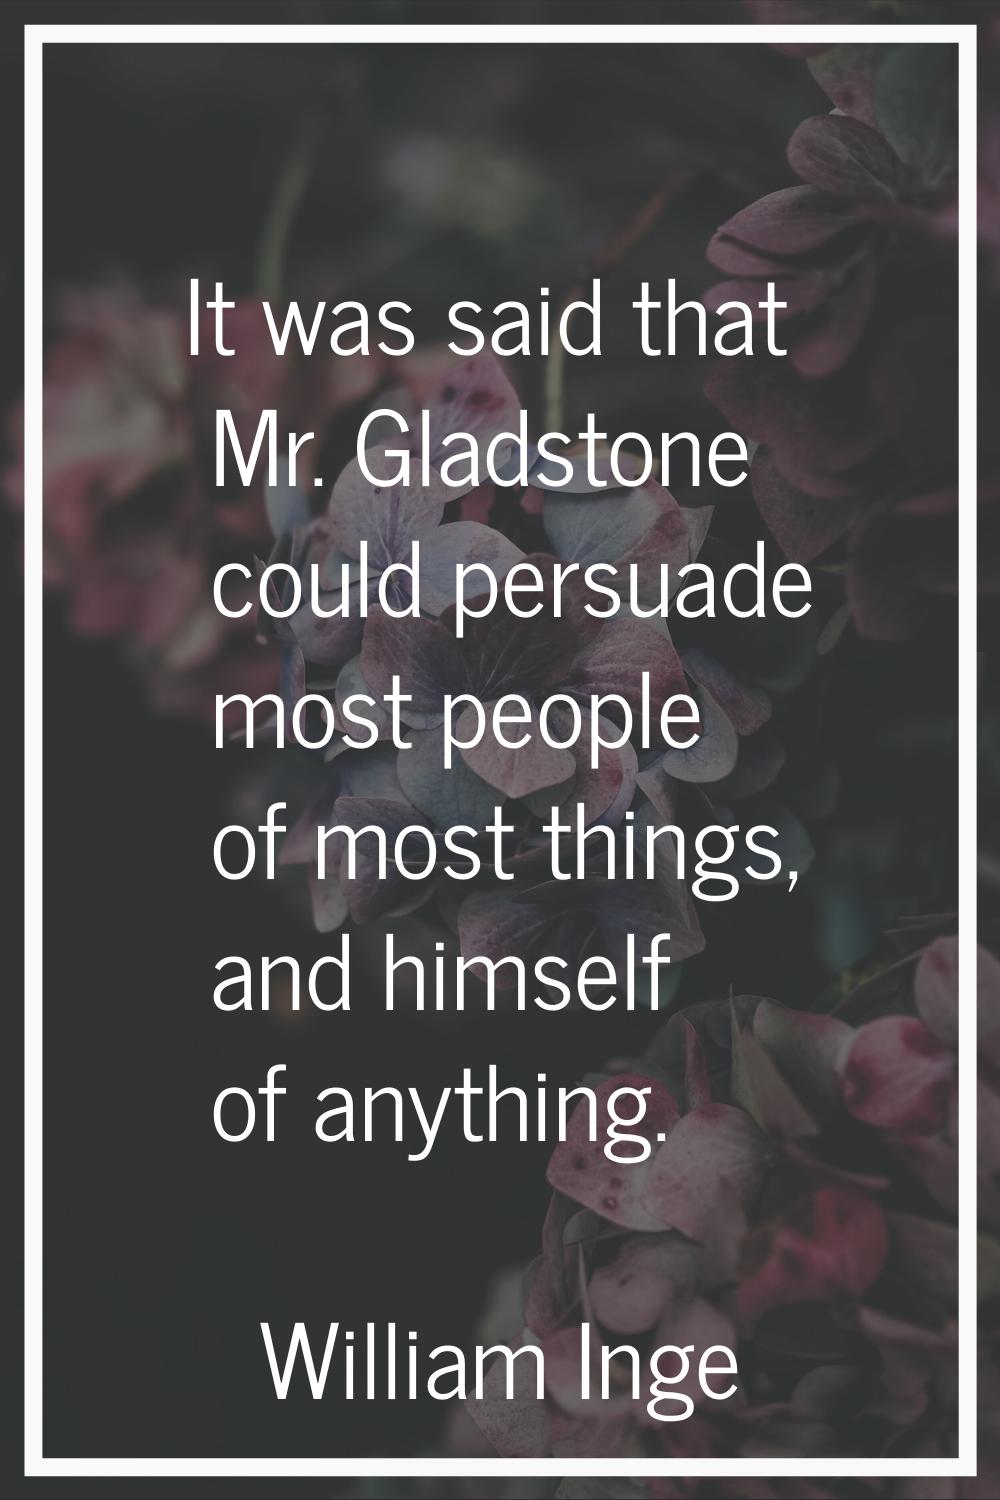 It was said that Mr. Gladstone could persuade most people of most things, and himself of anything.